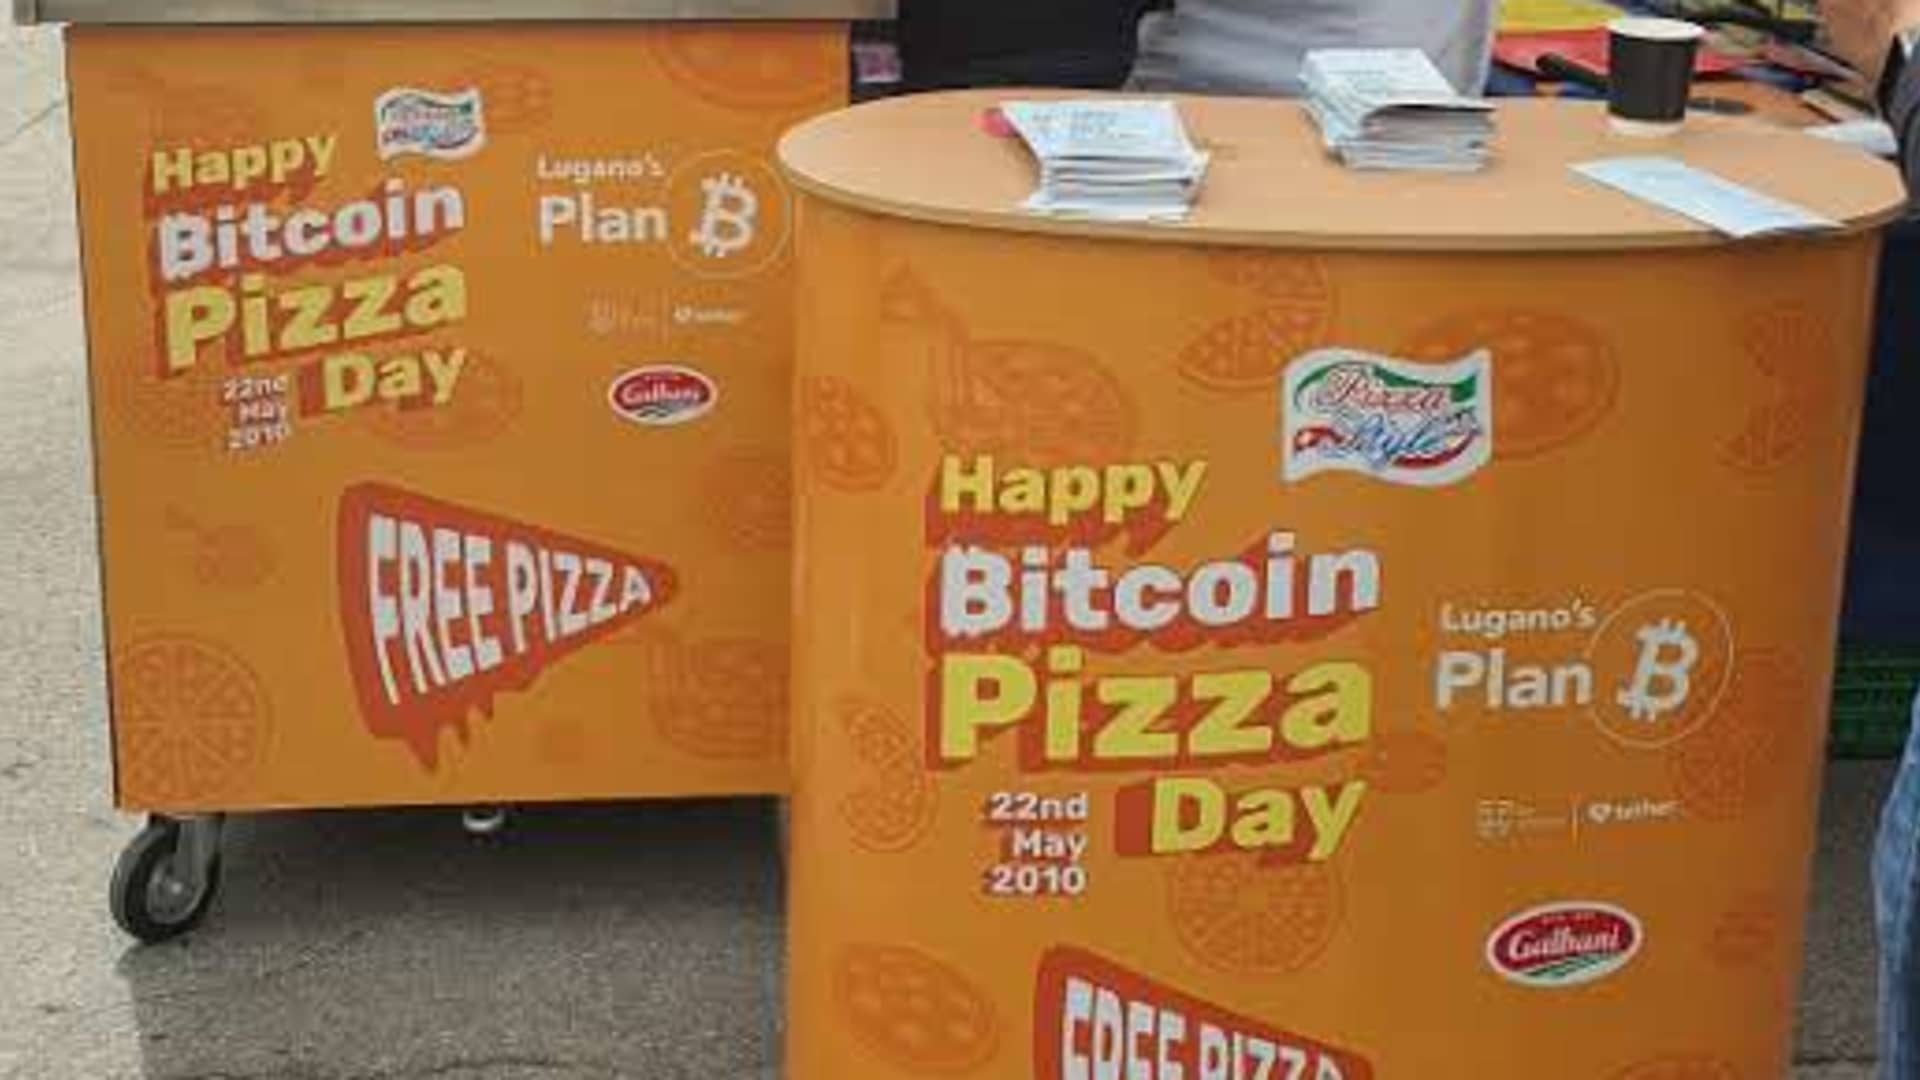 Bitcoin Pizza Day and NFTs: Crypto players take over main strip in Davos even after market crash